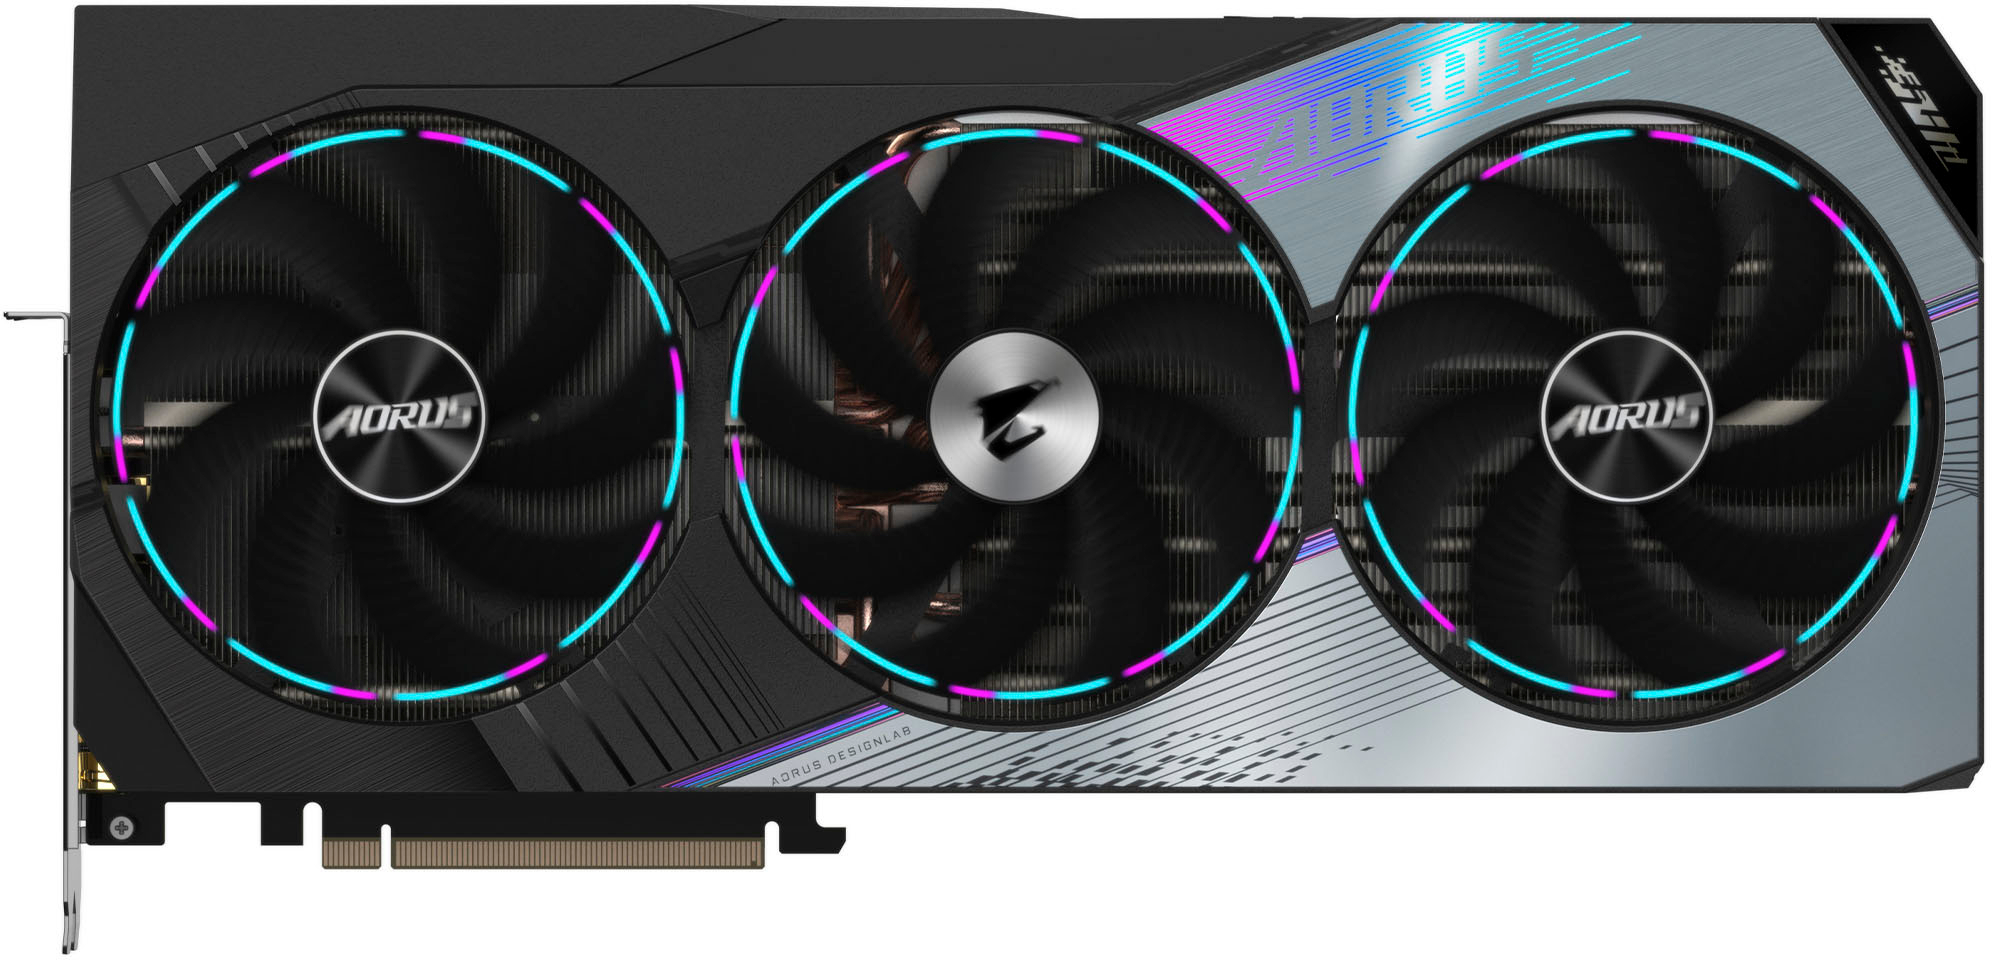 What do you recommend getting, an RTX 3080 Aorus Master or an RX